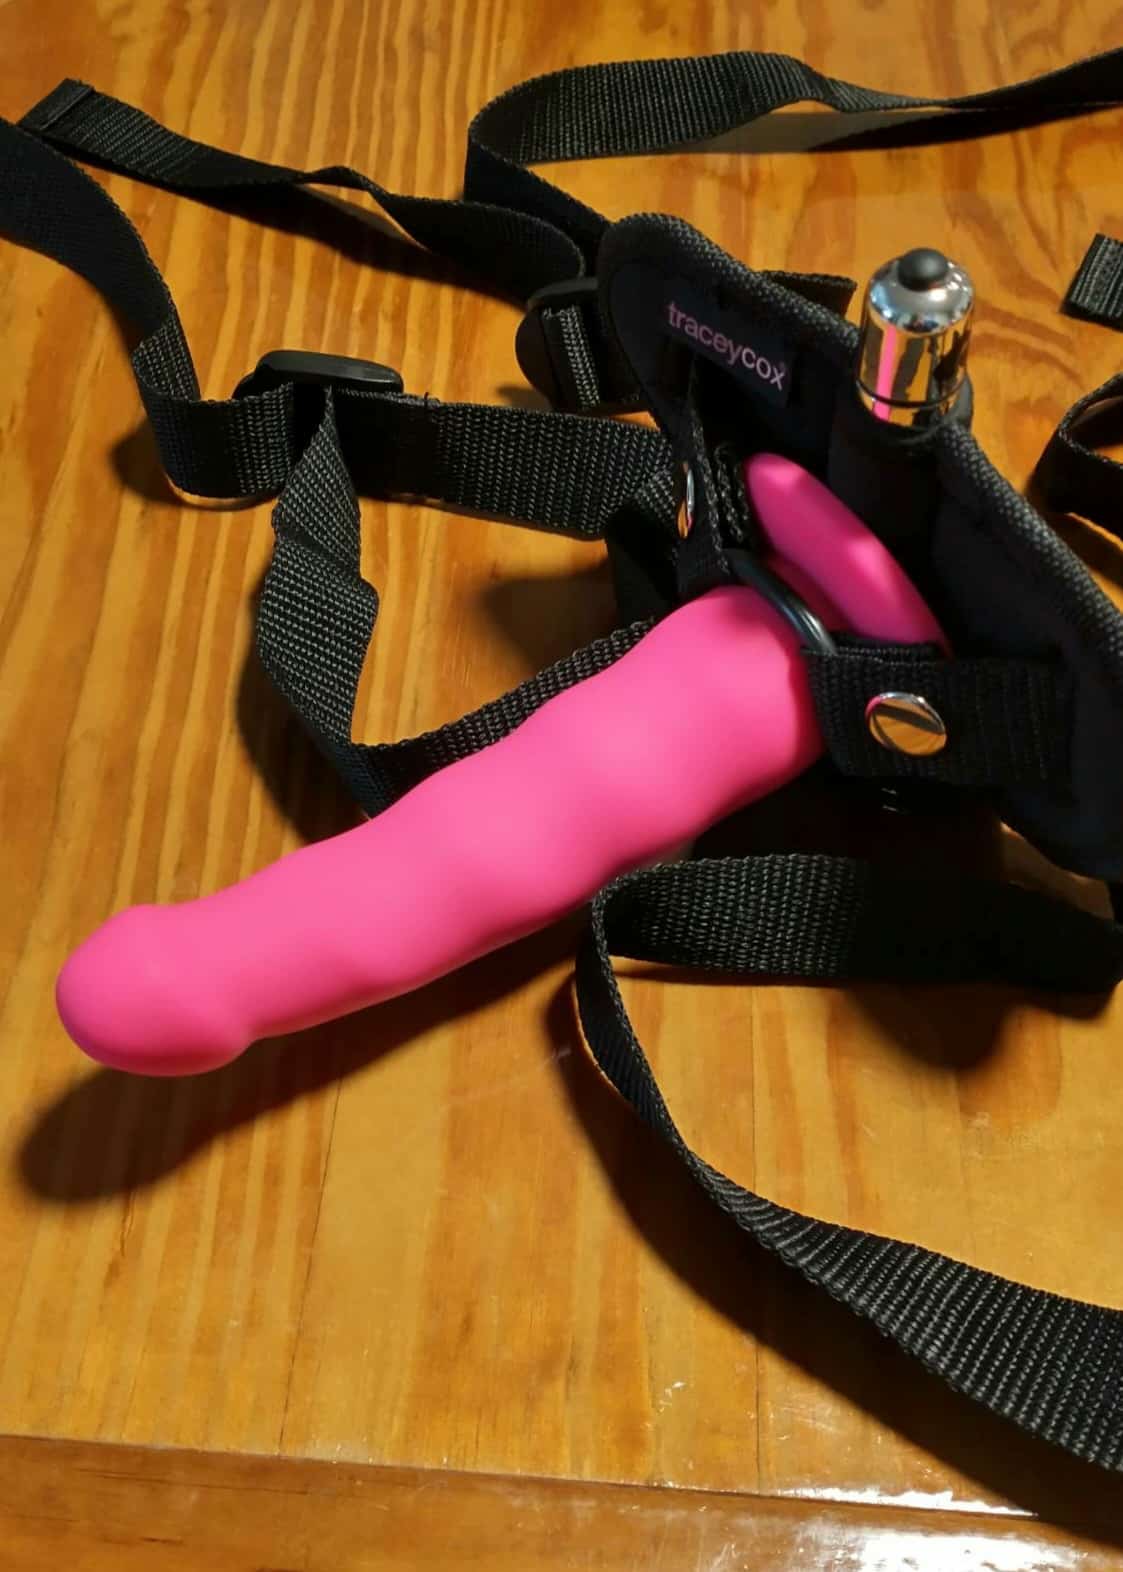 Tracey Cox Supersex Strap-On Pegging Kit . Slide 9